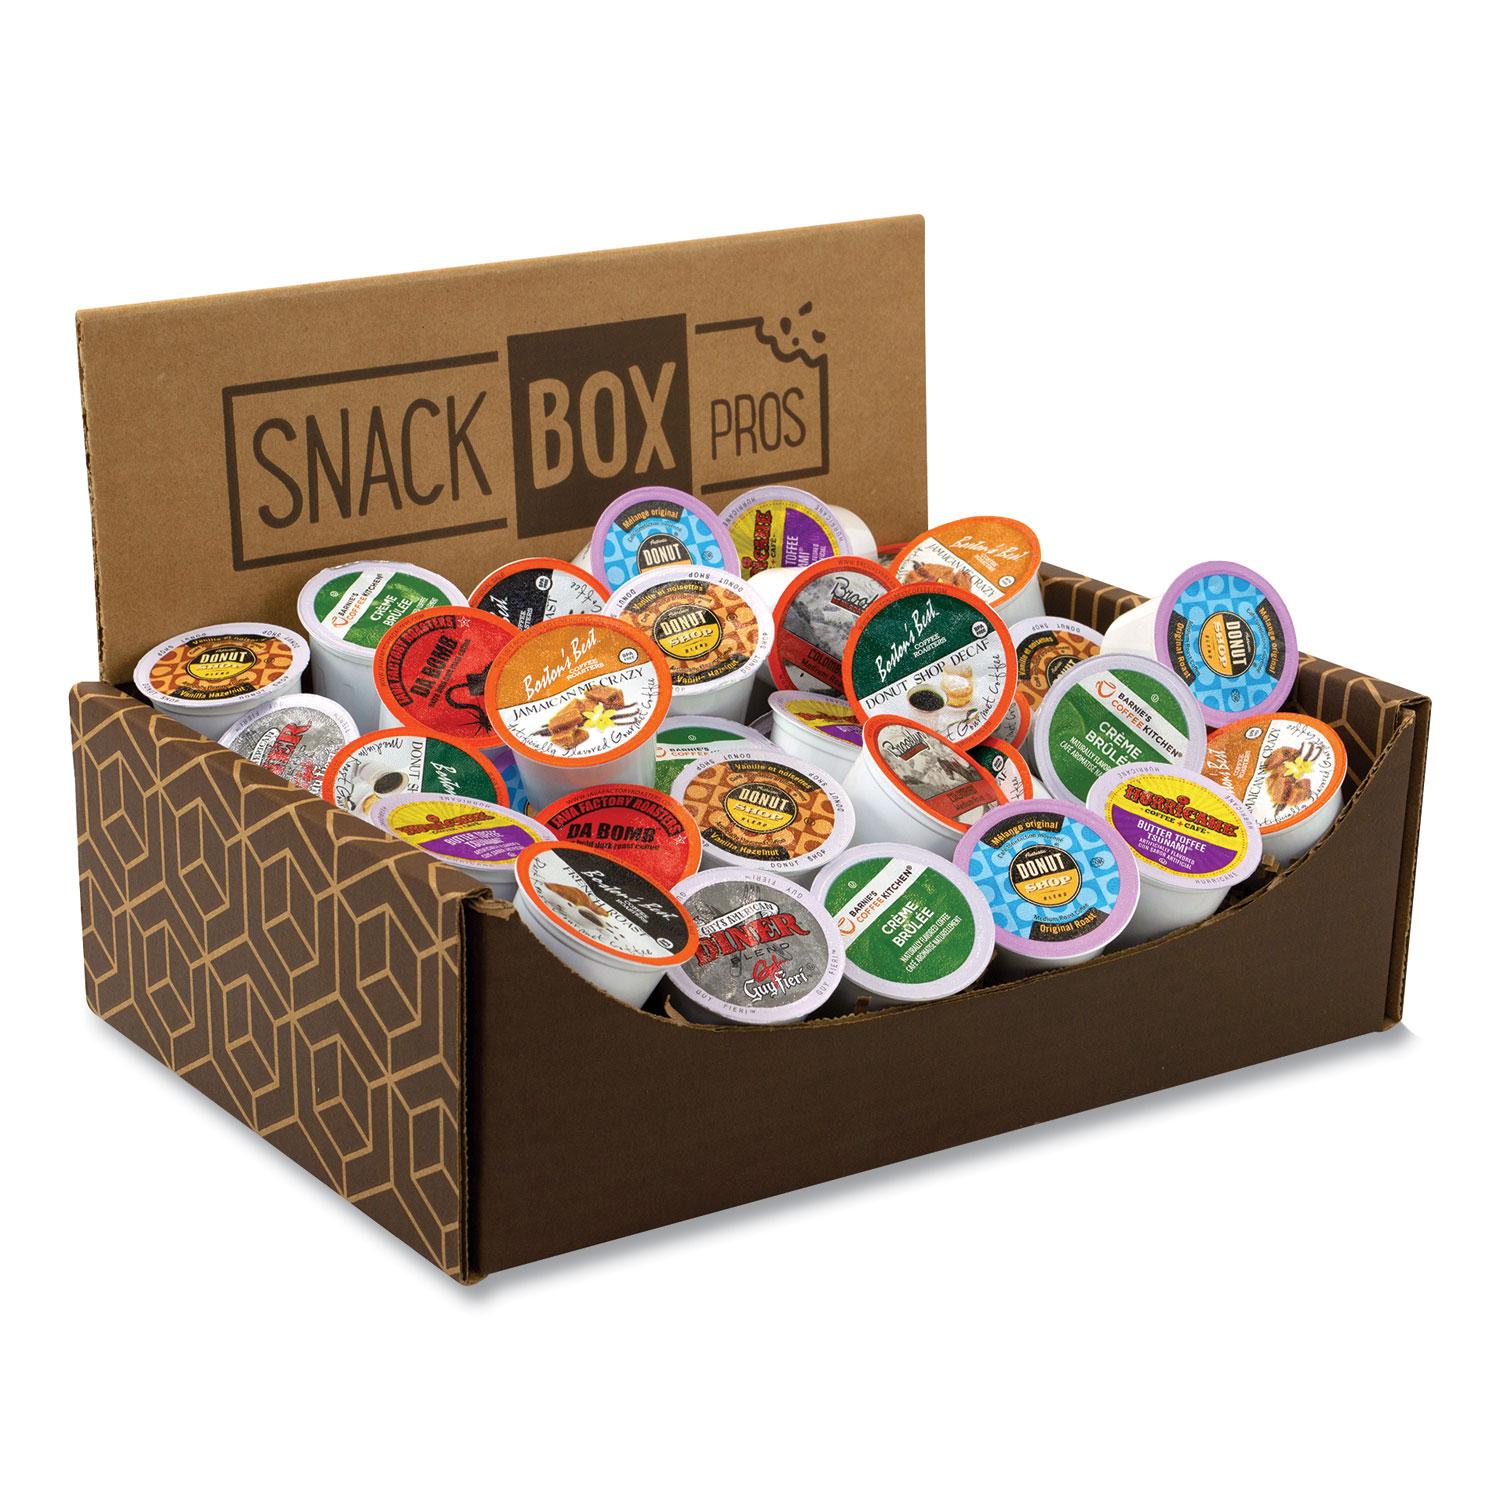  Snack Box Pros 70000024 K-Cup Assortment, 40/Box, Free Delivery in 1-4 Business Days (GRR70000024) 